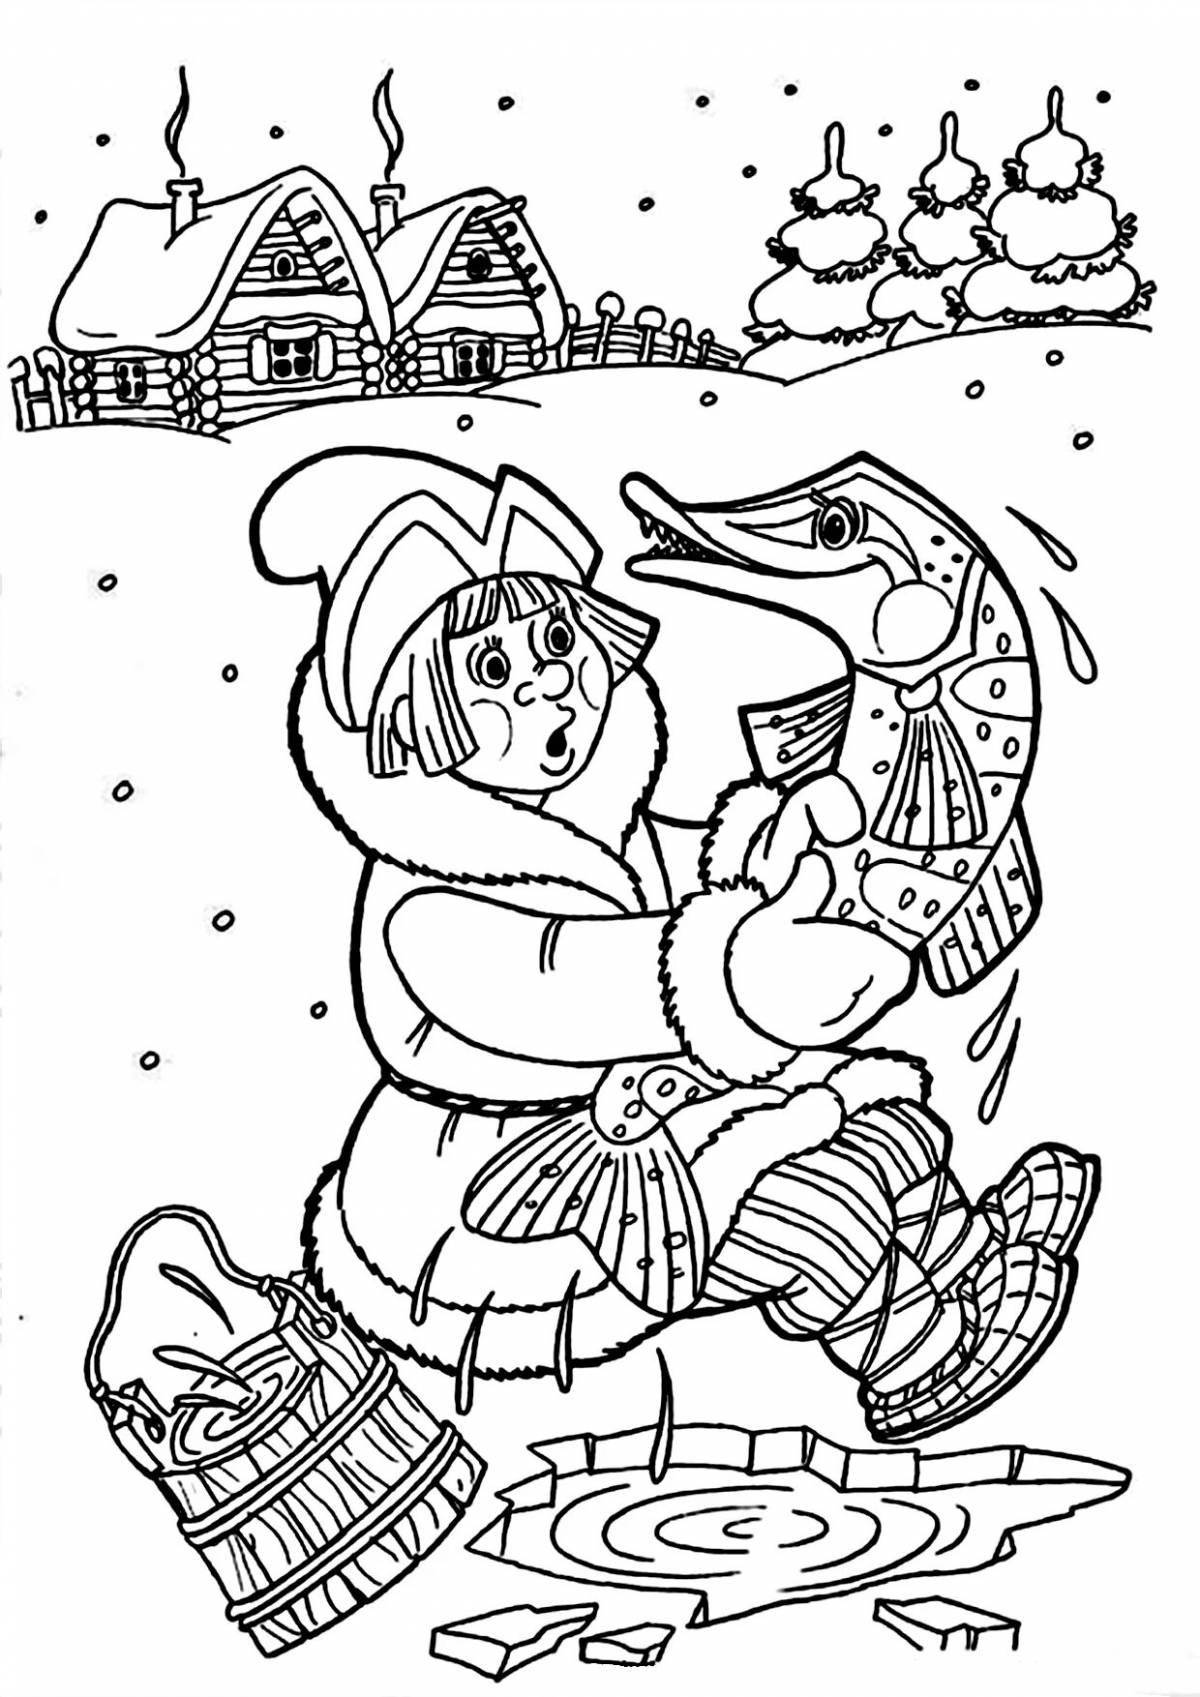 Wonderful fairy tale coloring pages for preschoolers